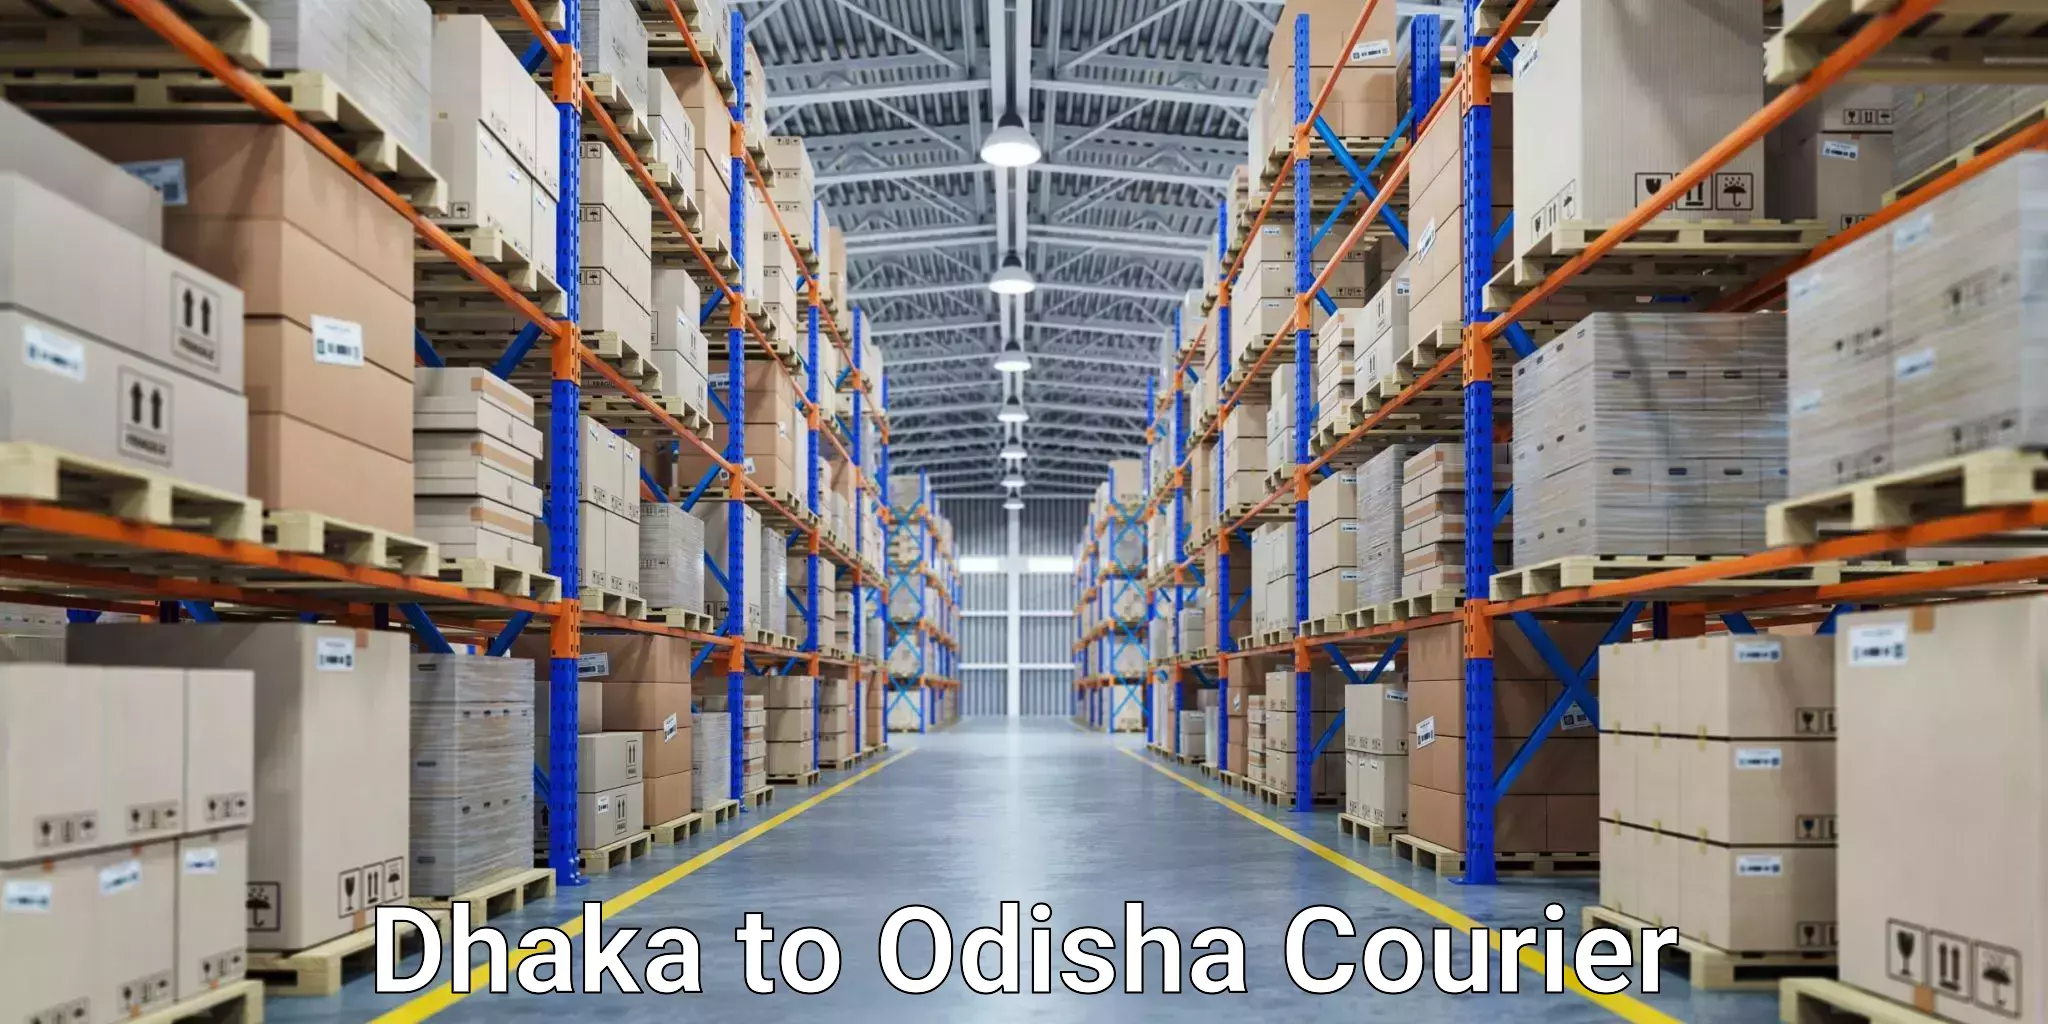 Overnight delivery services Dhaka to Odisha